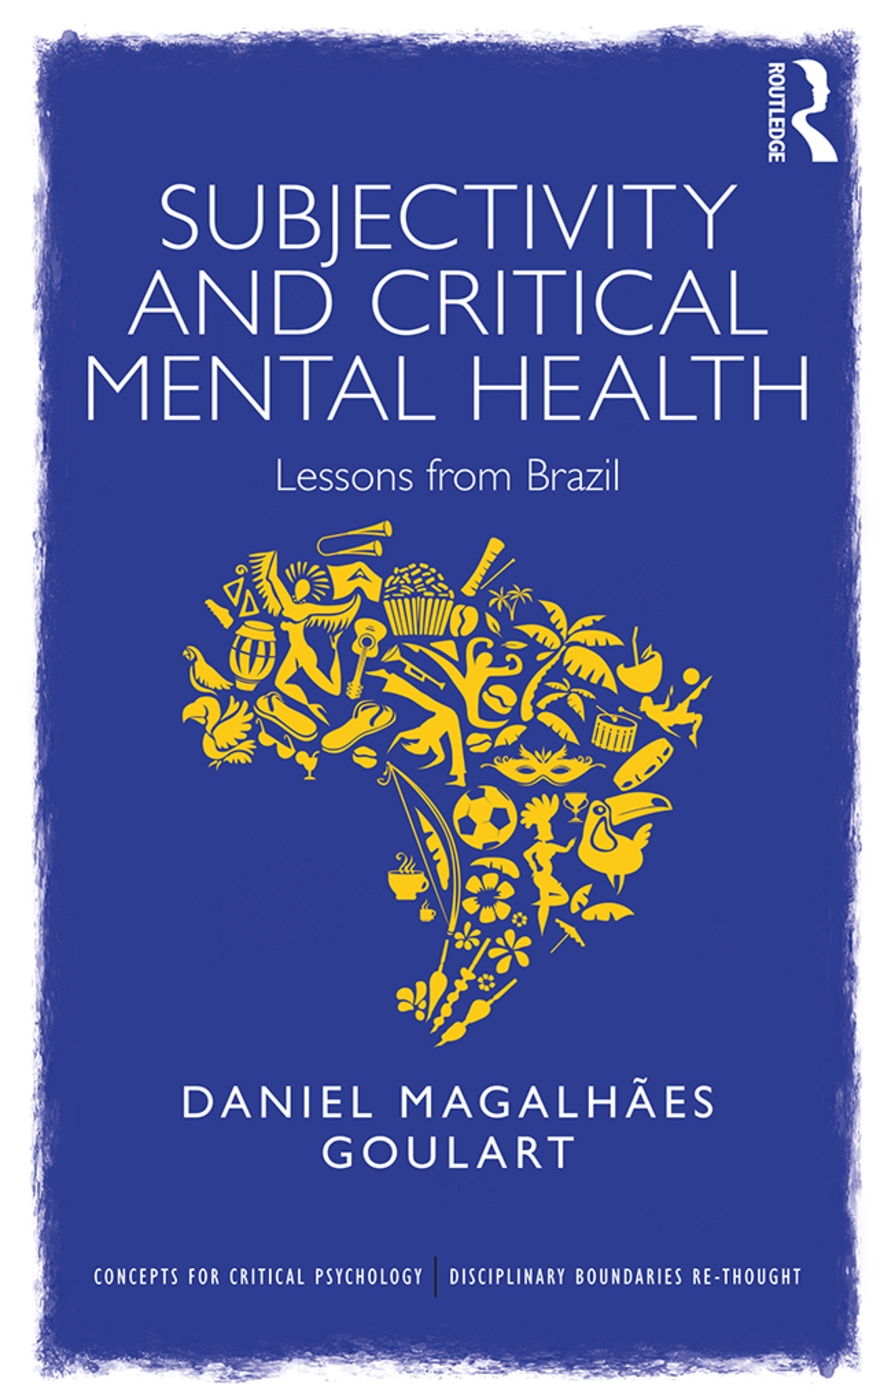 Subjectivity and Critical Mental Health: Lessons from Brazil